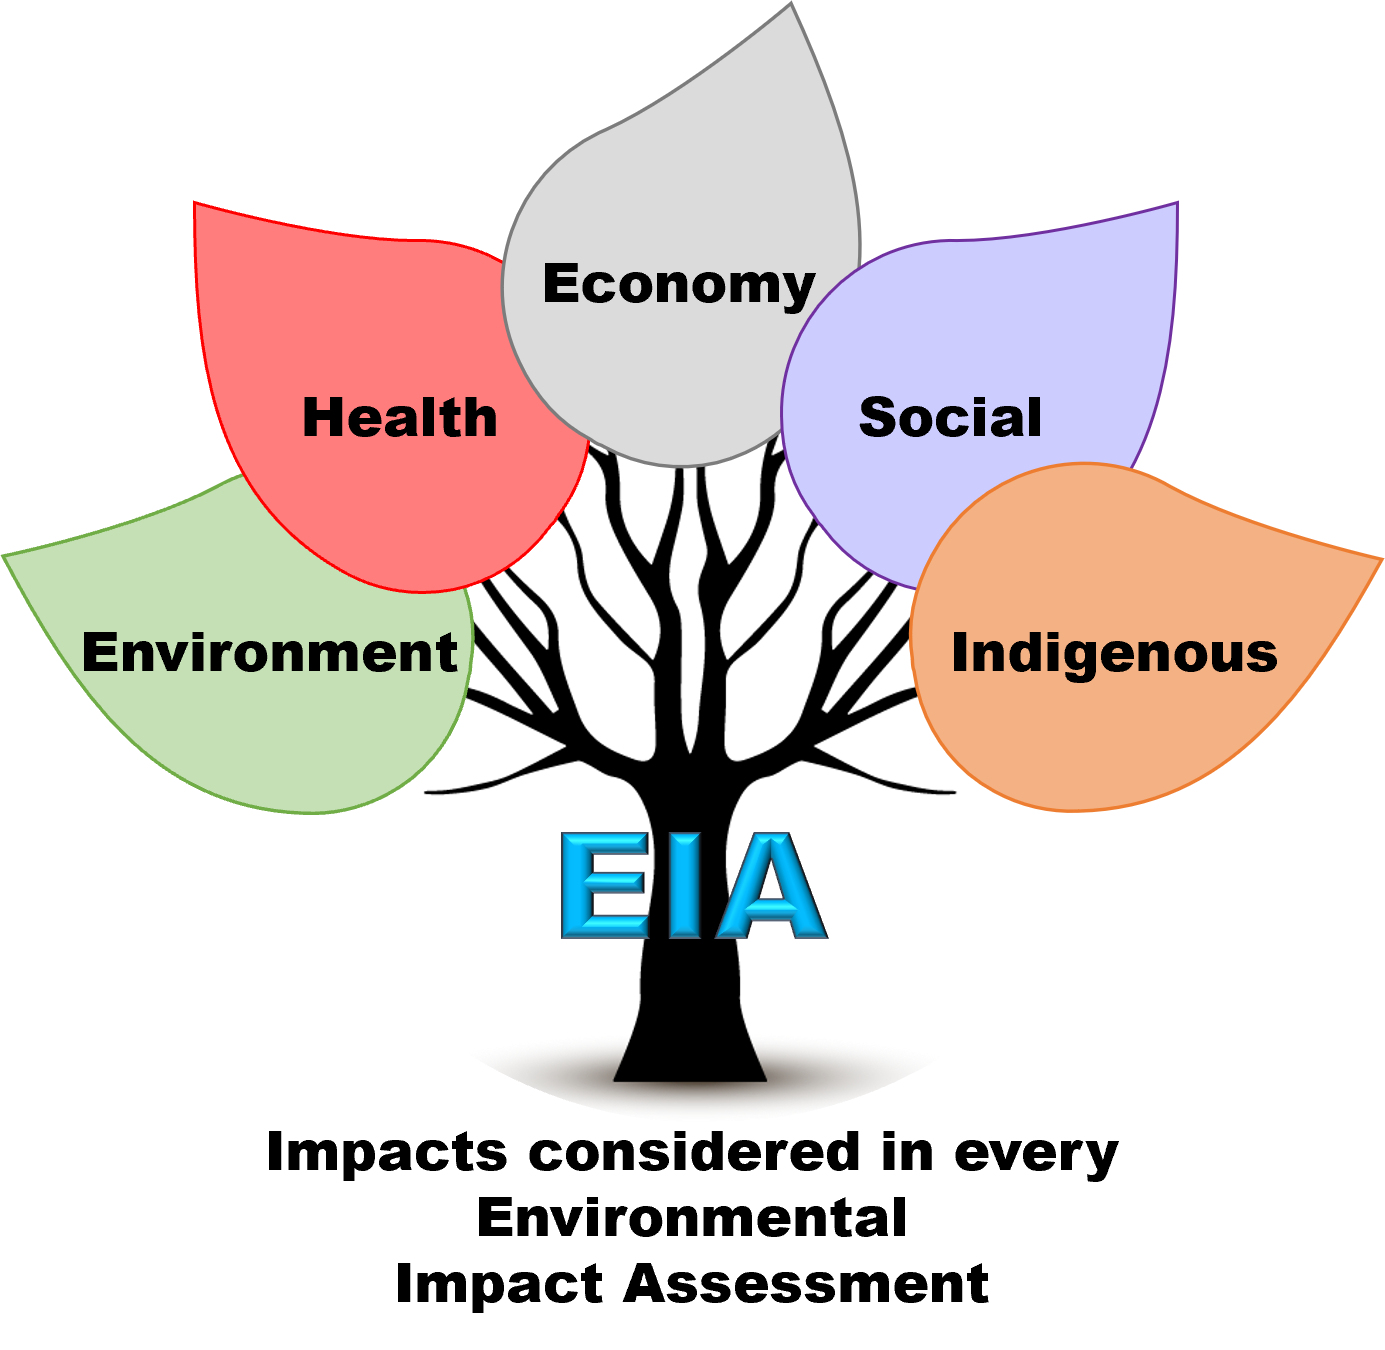 Figure 1 description: A tree with five large leaves representing the main impact categories considered in Environmental Impact Assessment. The leaves are labeled as environment, health, economy, social, and Indigenous.